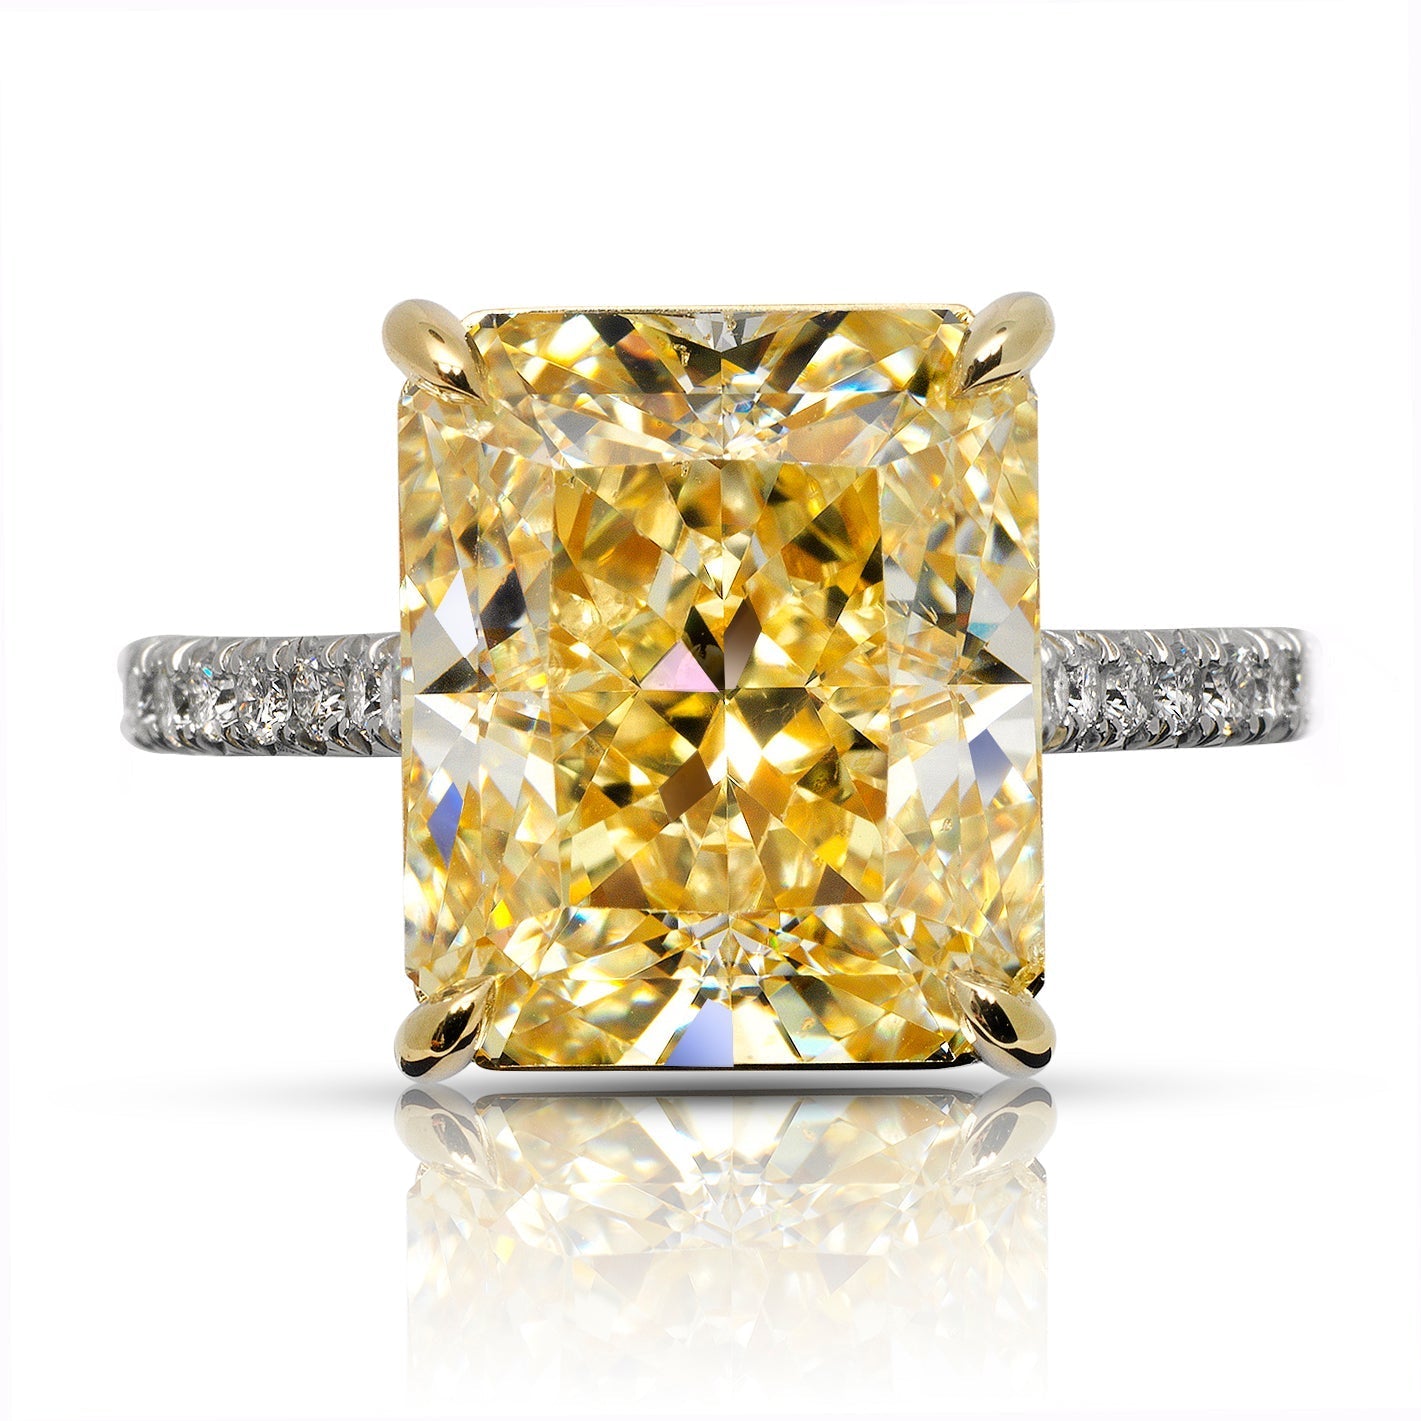 Yellow Diamond Ring Radiant Cut 9 Carat Sidestone Ring in Platinum and 18K Gold Front View